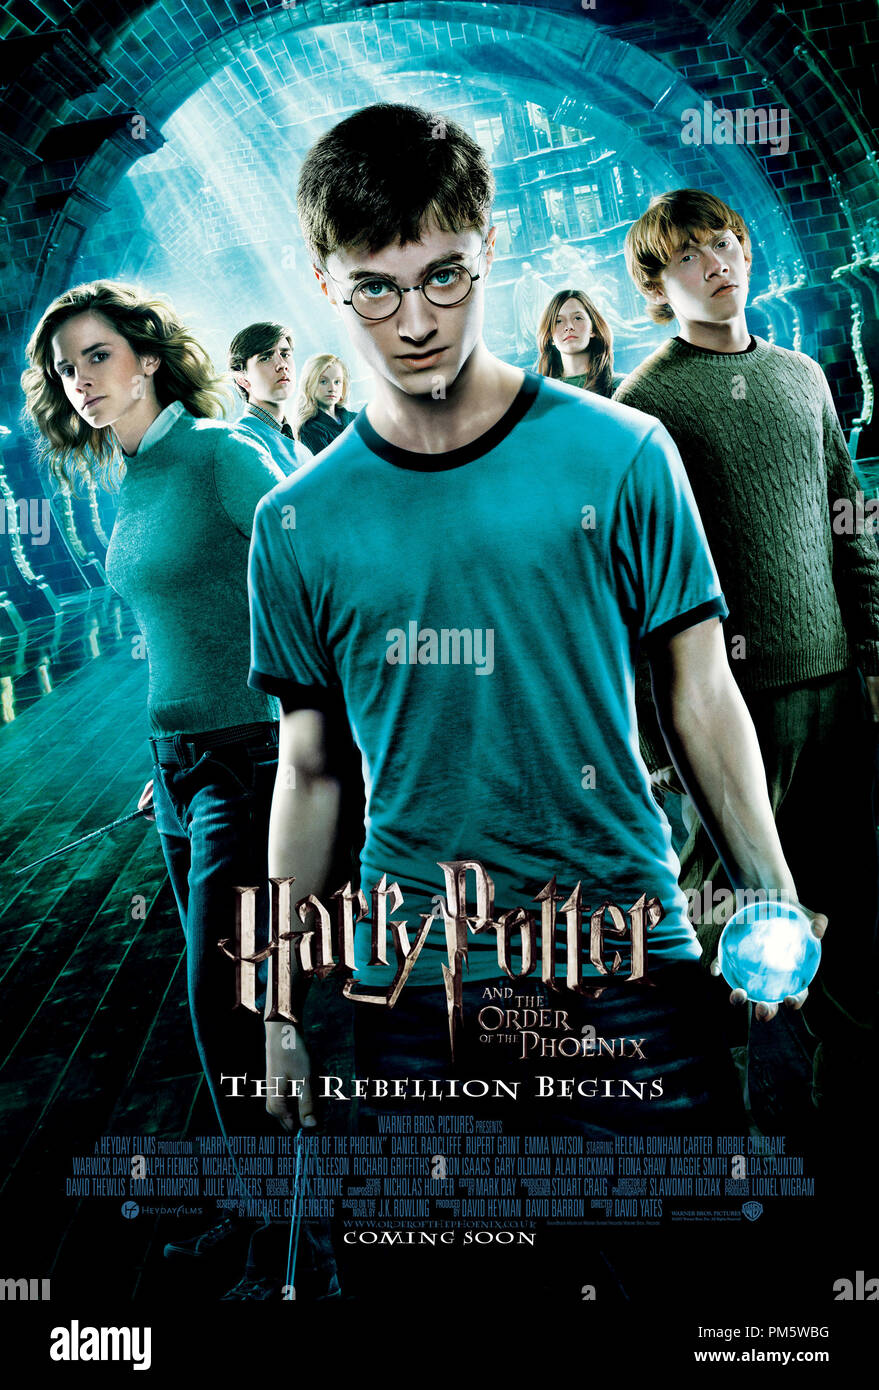 Harry potter movie poster hi-res stock photography and images - Alamy